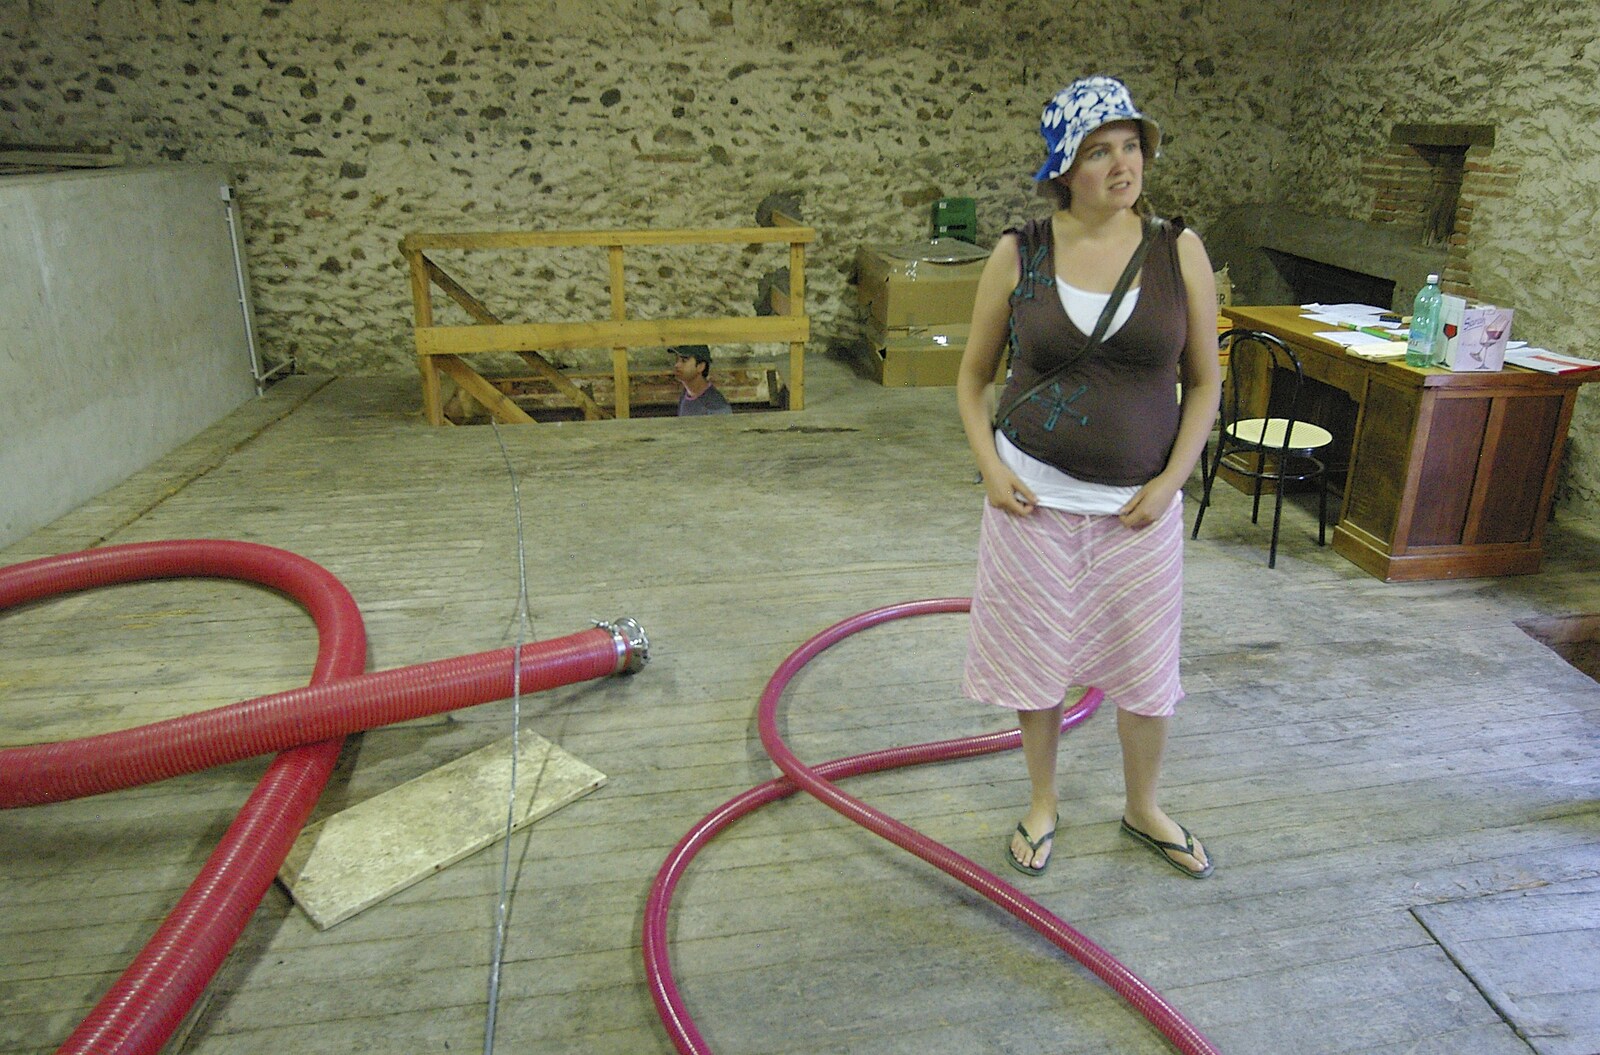 Isobel stands around by some pipes from Grape Picking and Pressing, Roussillon, France - 19th September 2006